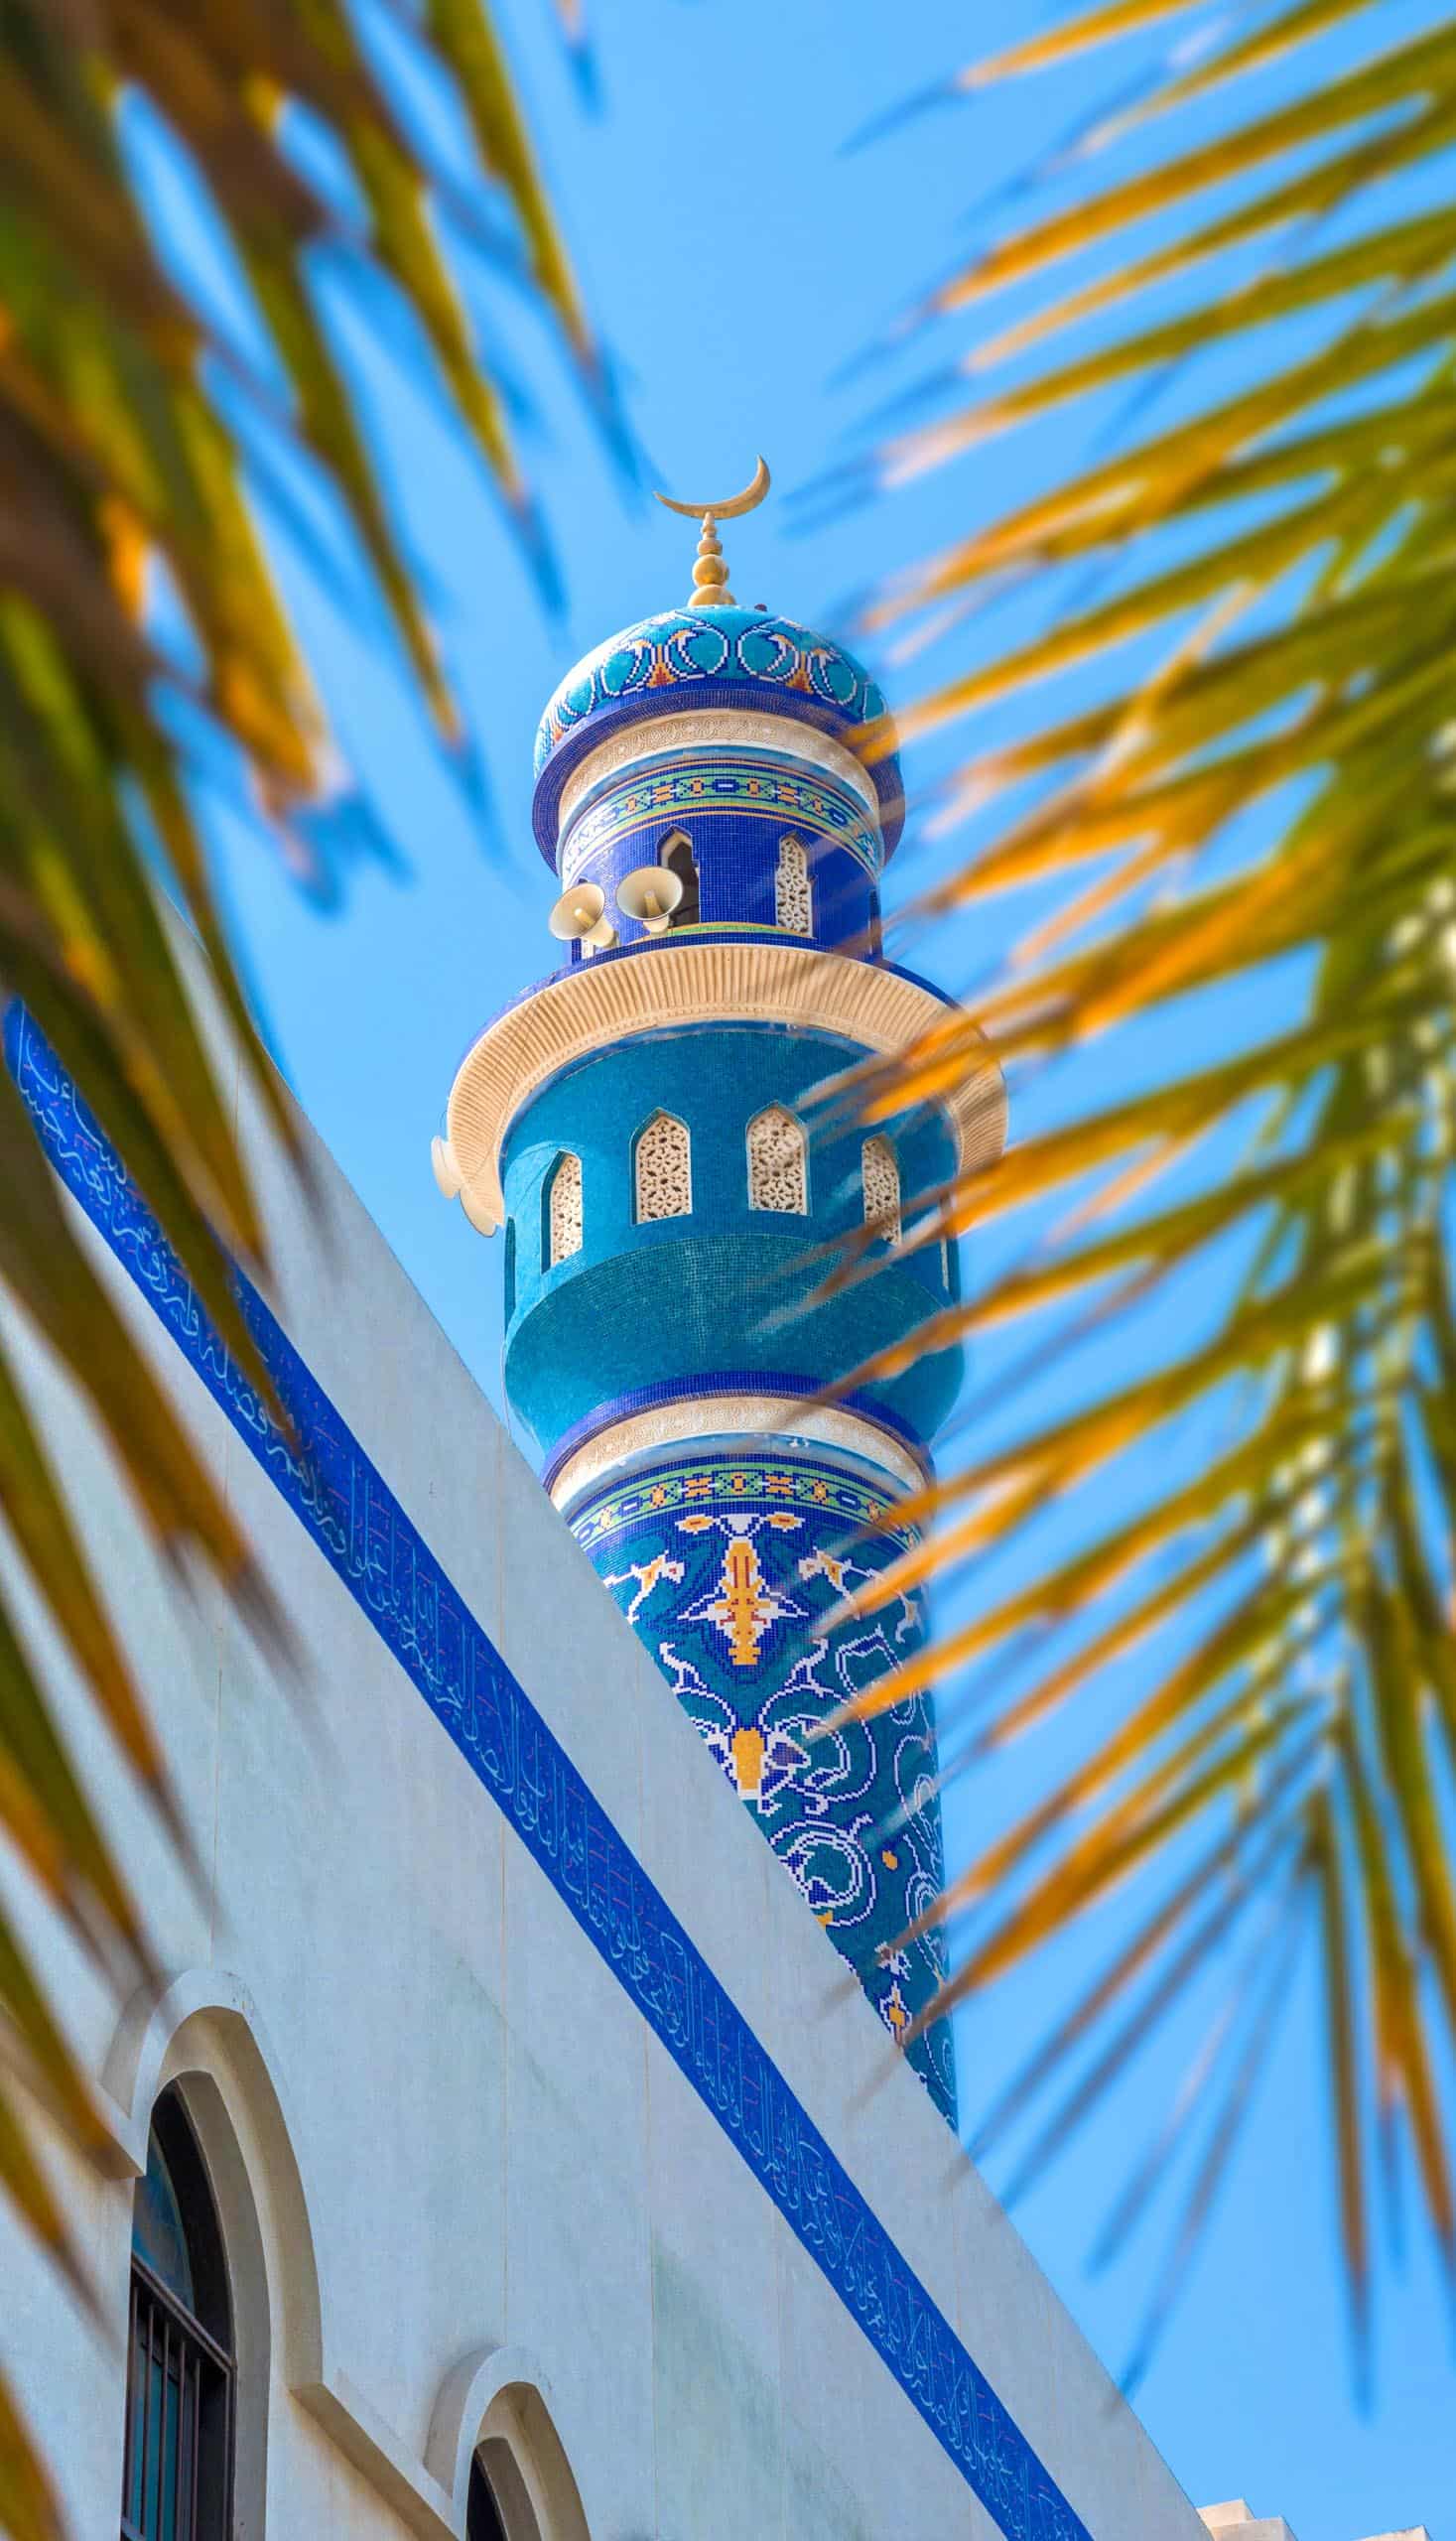 A mosque in Oman.